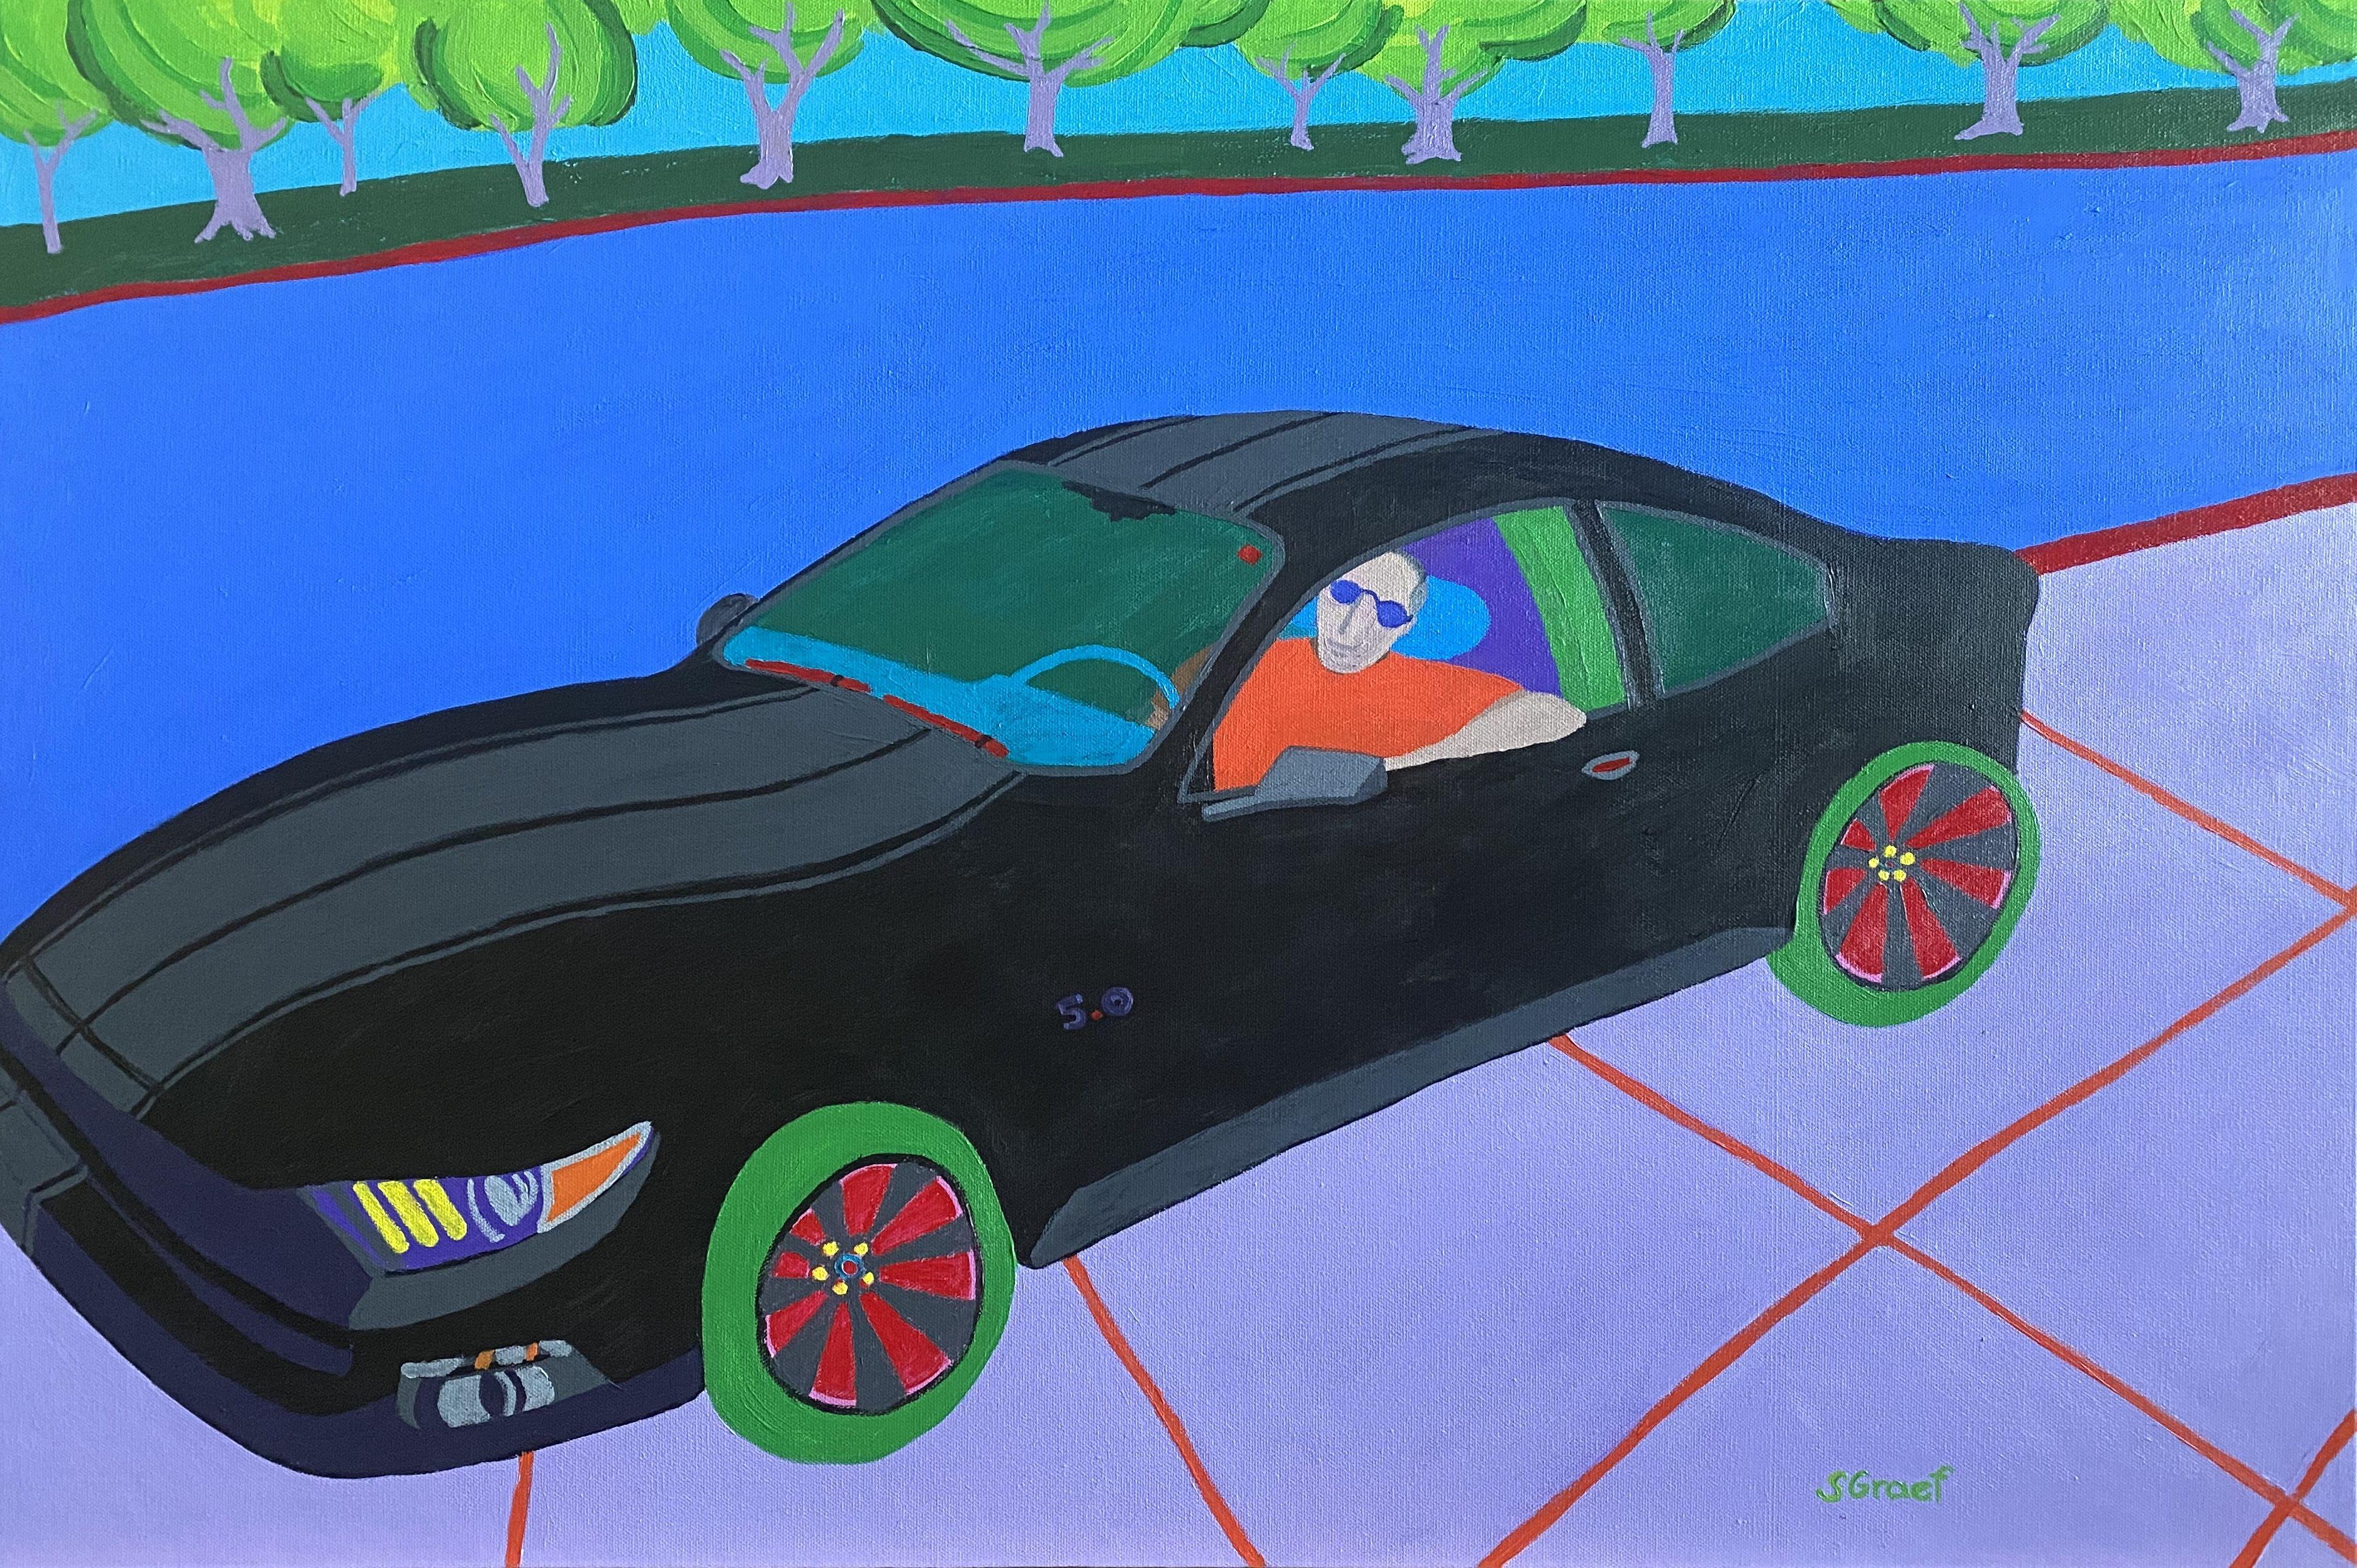 I wanted to create an image of my husband's beloved Mustang with him in it and so I did. Painted in vibrant hues of blue, green, violet and of course the black car. I was told as I was painting this one, " You gotta paint the Mustang black with the